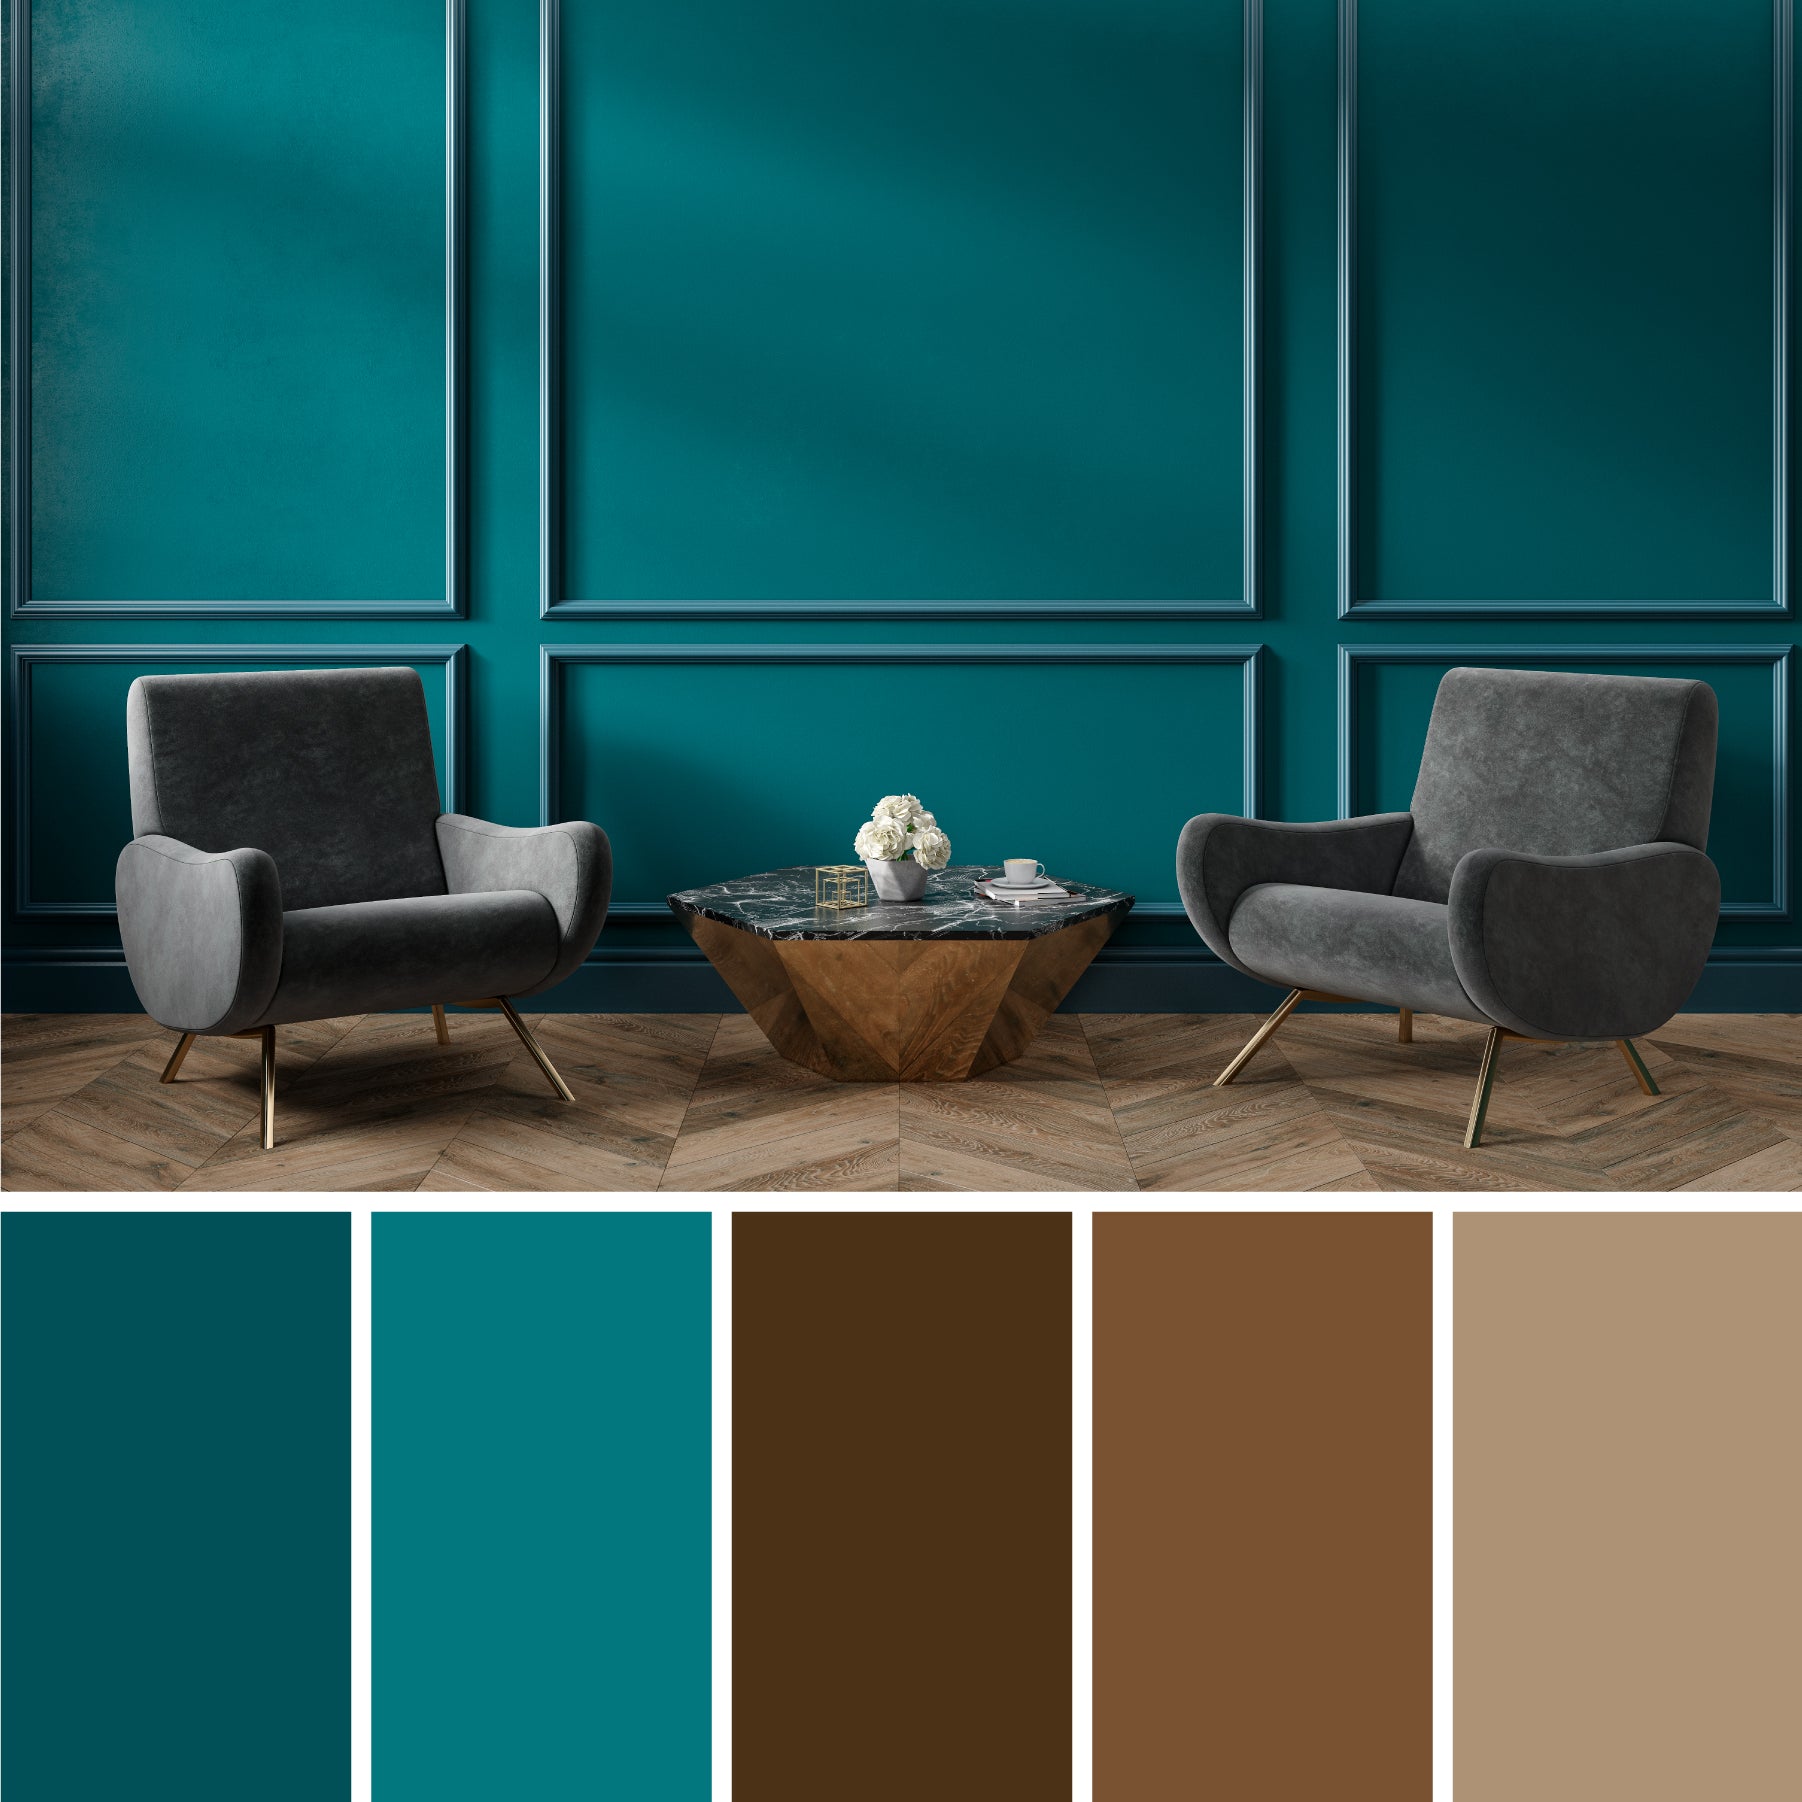 teal-and-brown-color-palette